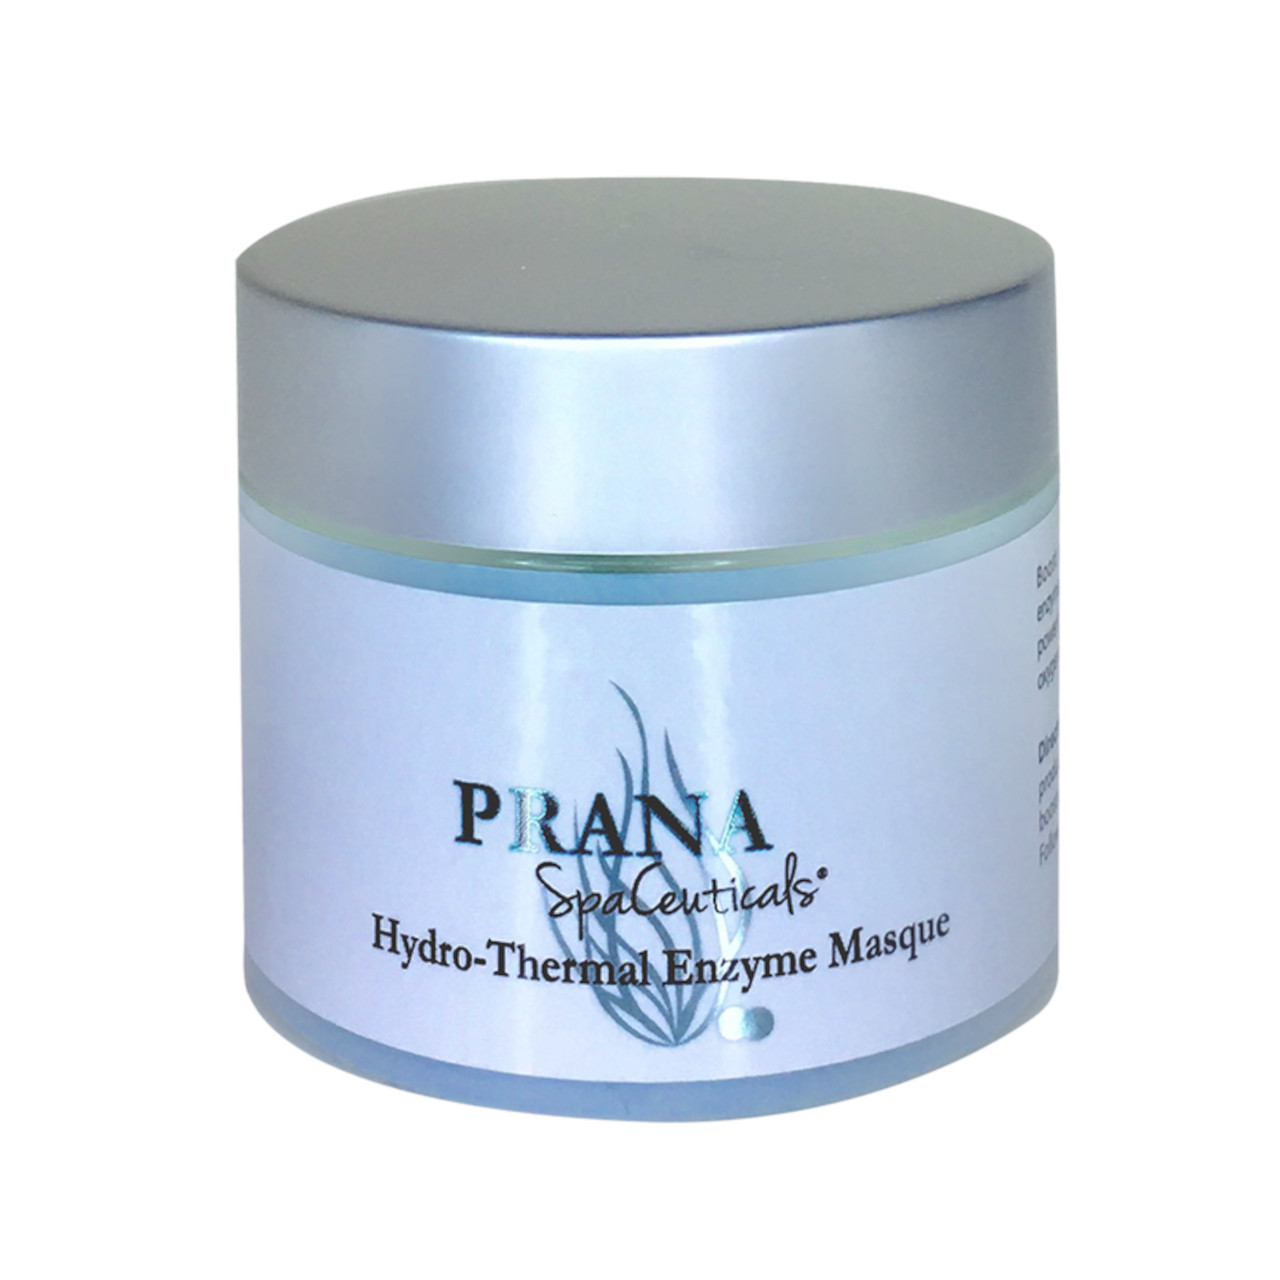 Prana SpaCeuticals Hydro Thermal Enzyme Mask